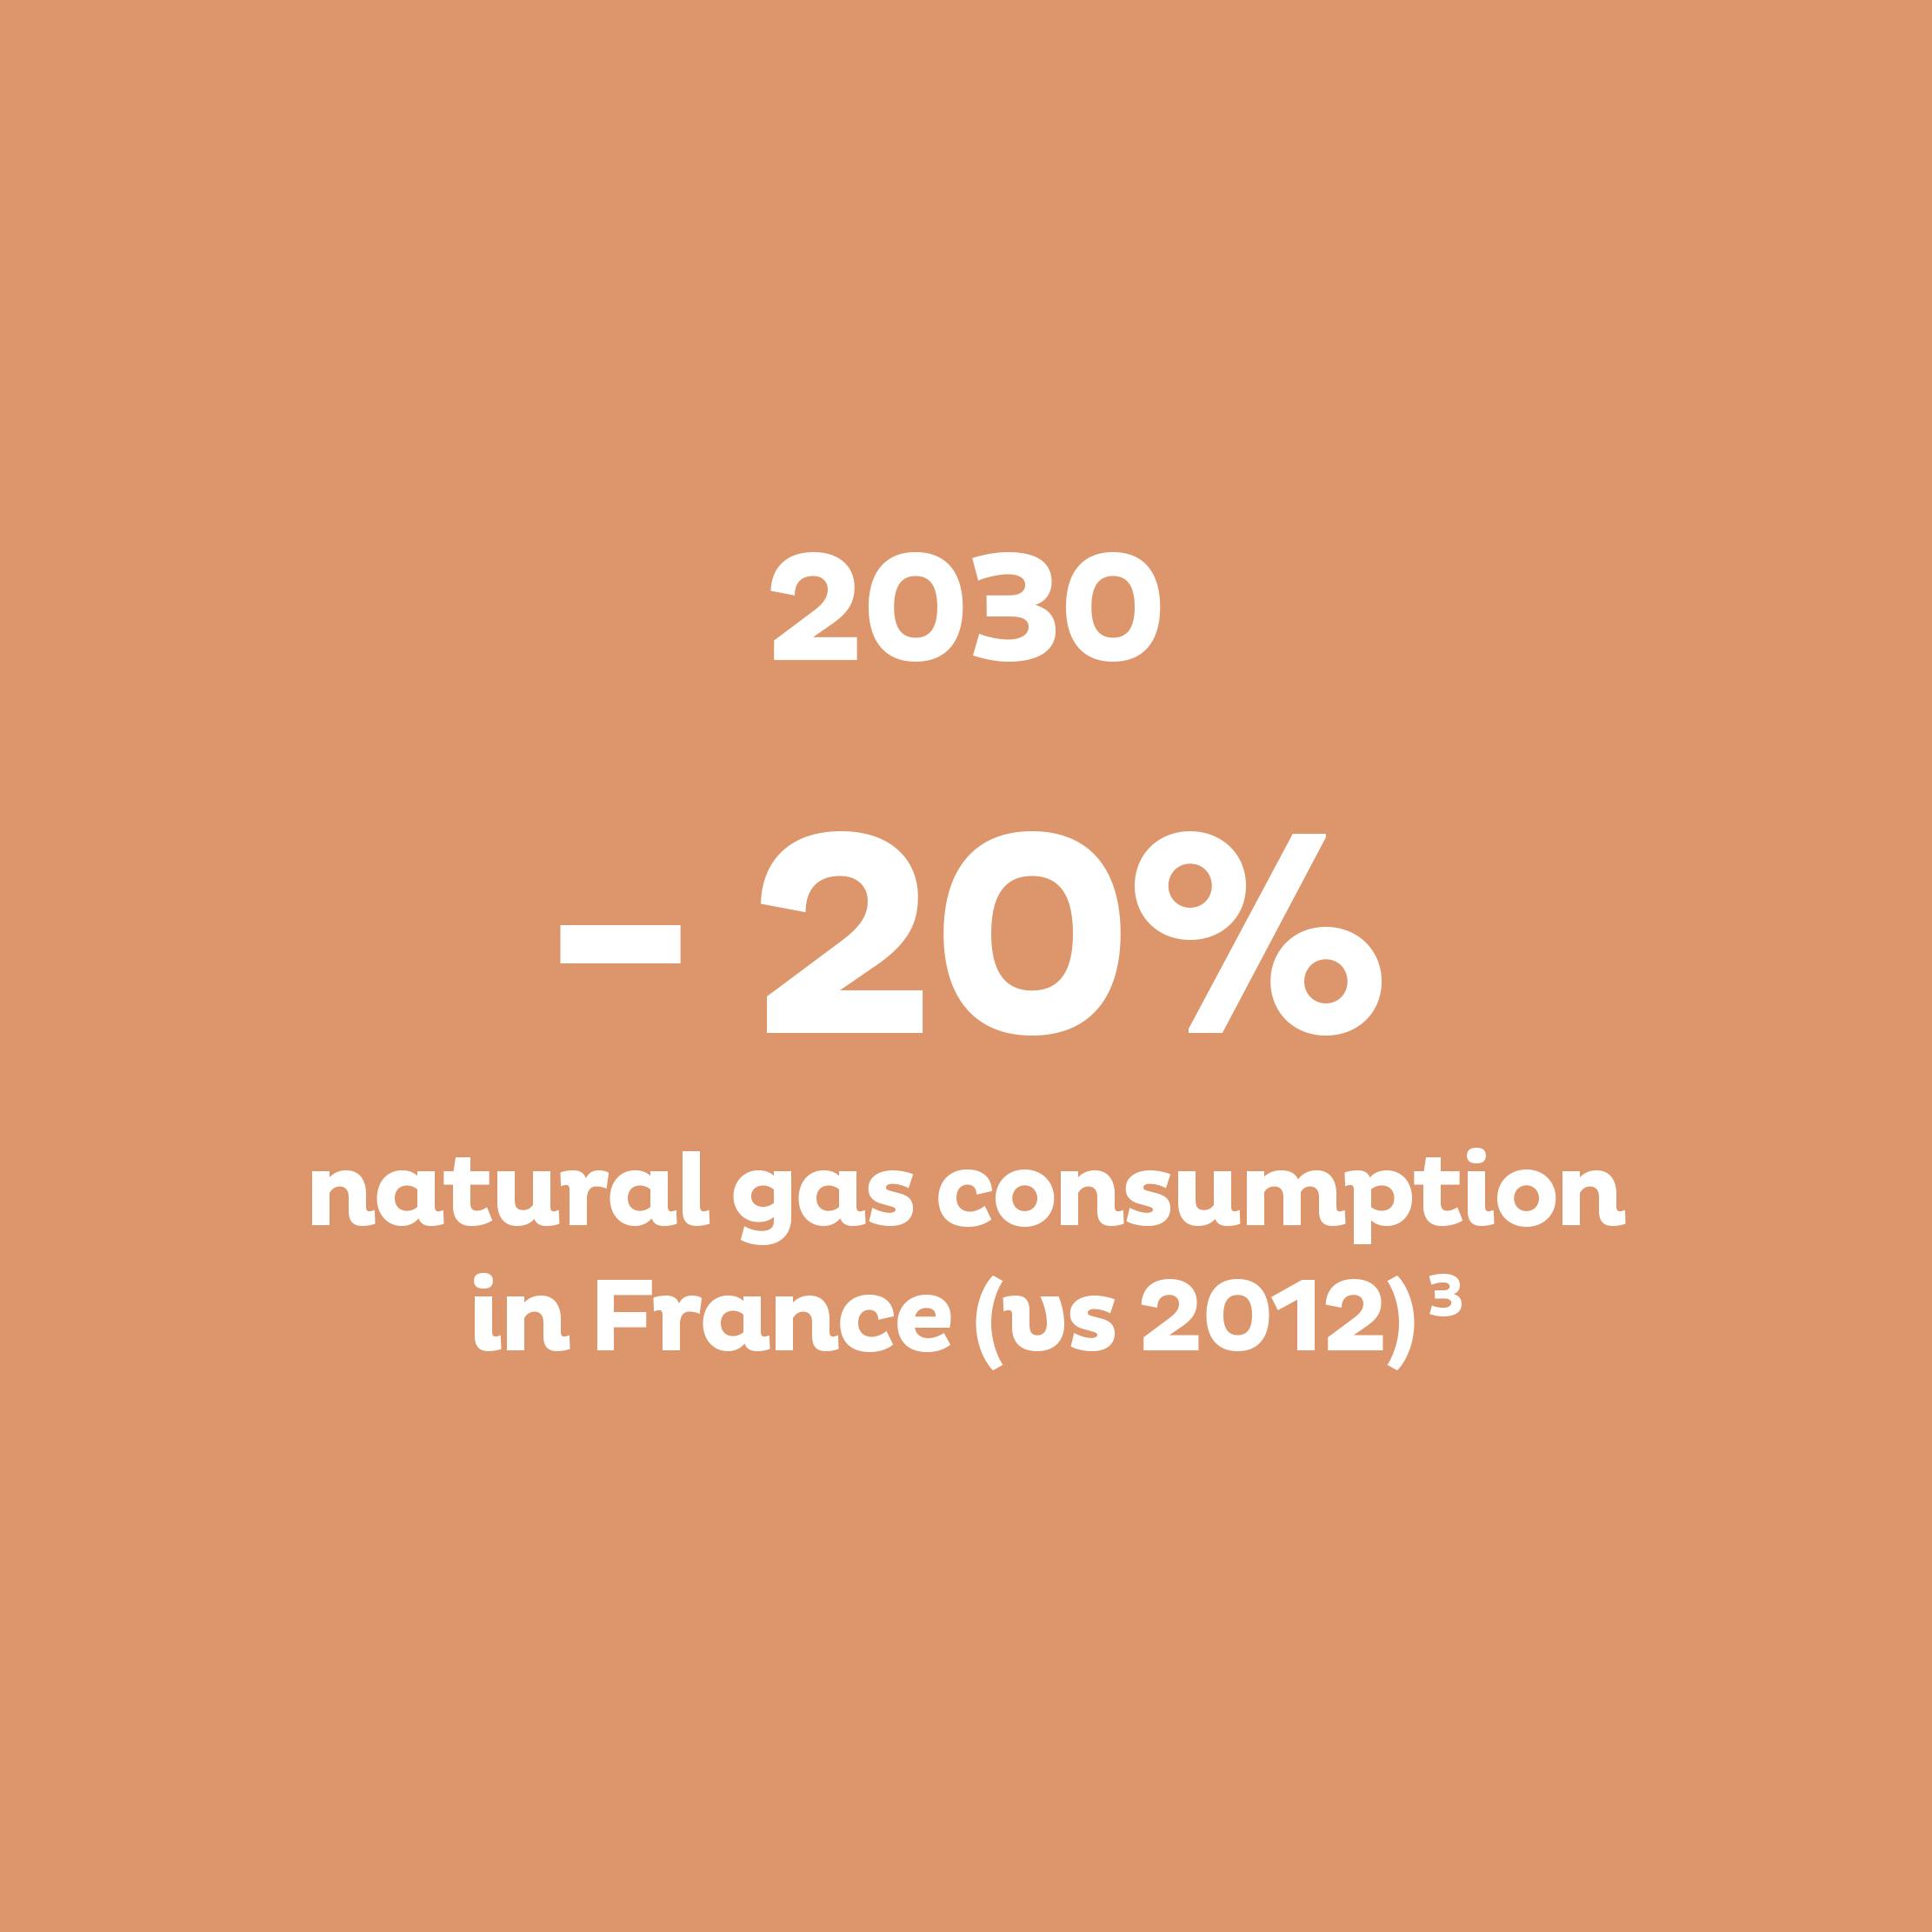 2030 : –20% natural gas consumption in France (vs 2012)3